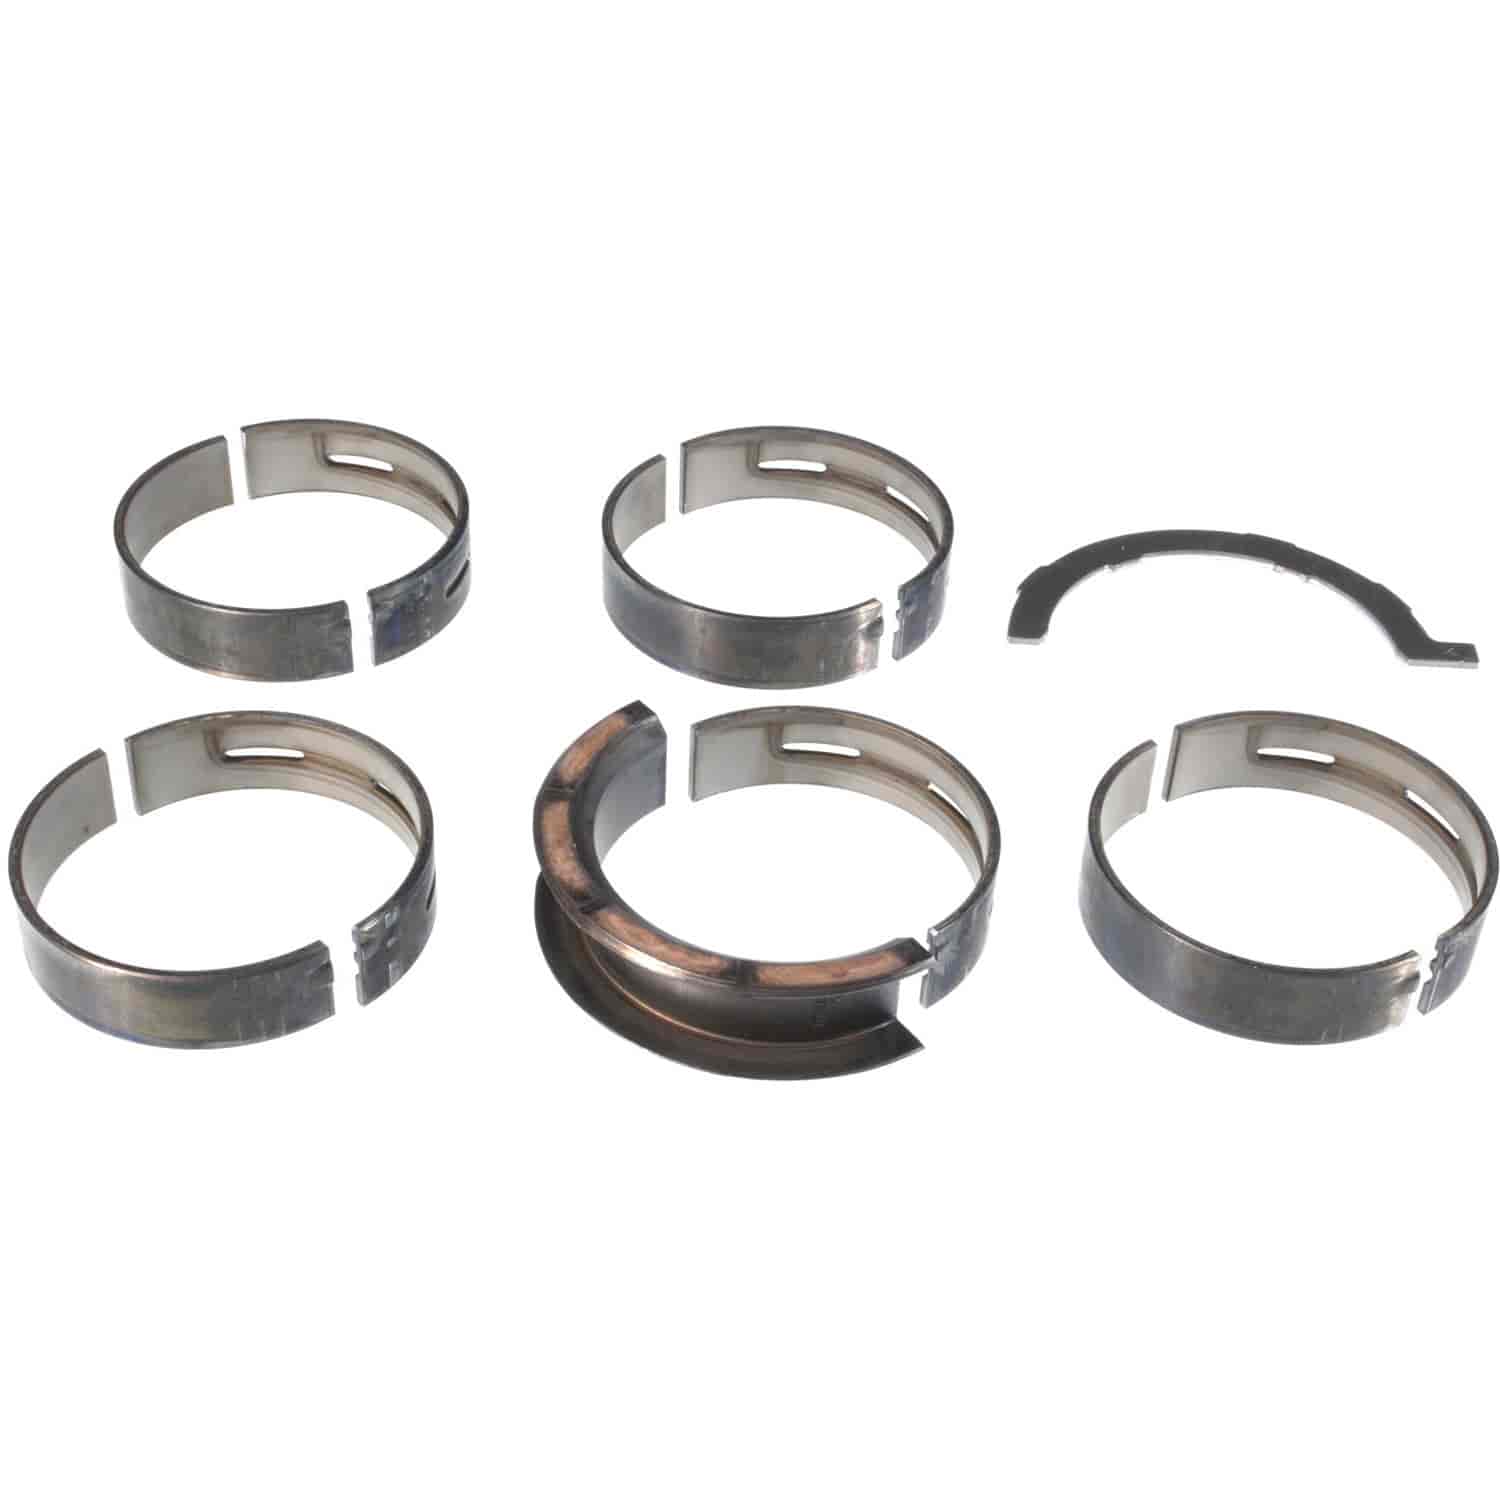 Main Bearing Set Ford 2011-2014  V8 Coyote 5.0L with -.25mm Undersize